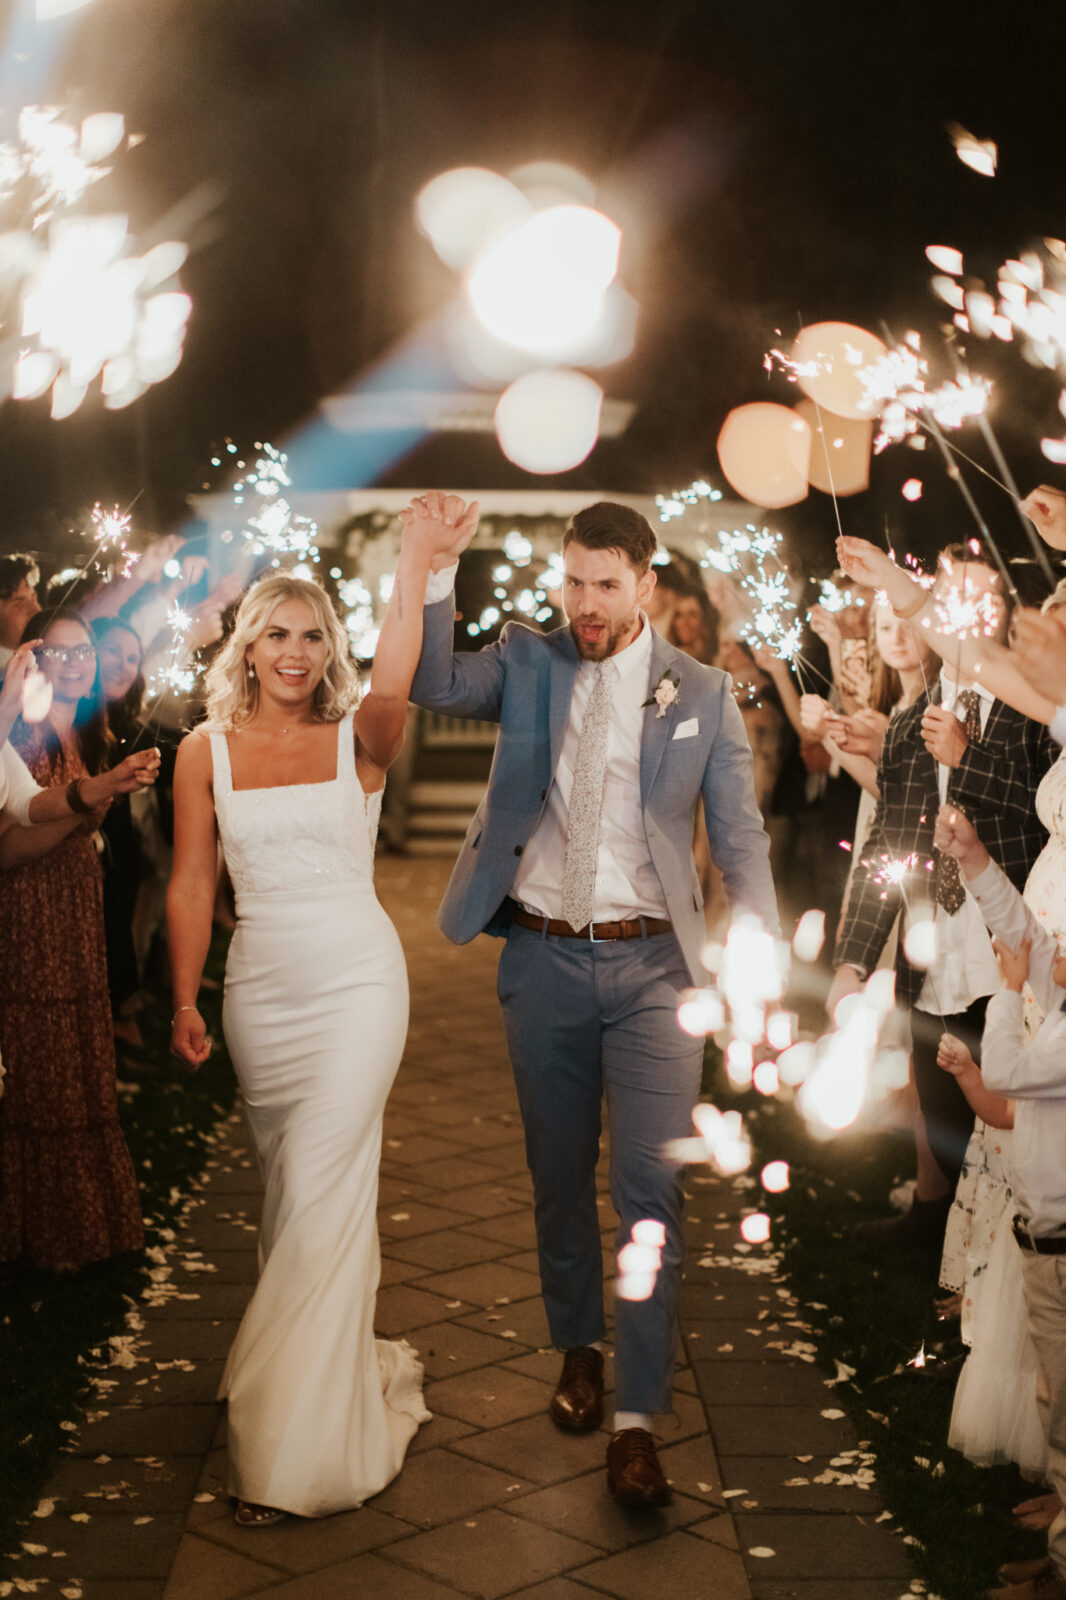 This Lethbridge wedding at Norland Historic Estate features a sparkler exit, vintage blue suits, and an old-school getaway. vintage getaway car, vintage meets classic wedding inspiration, summer wedding inspiration
